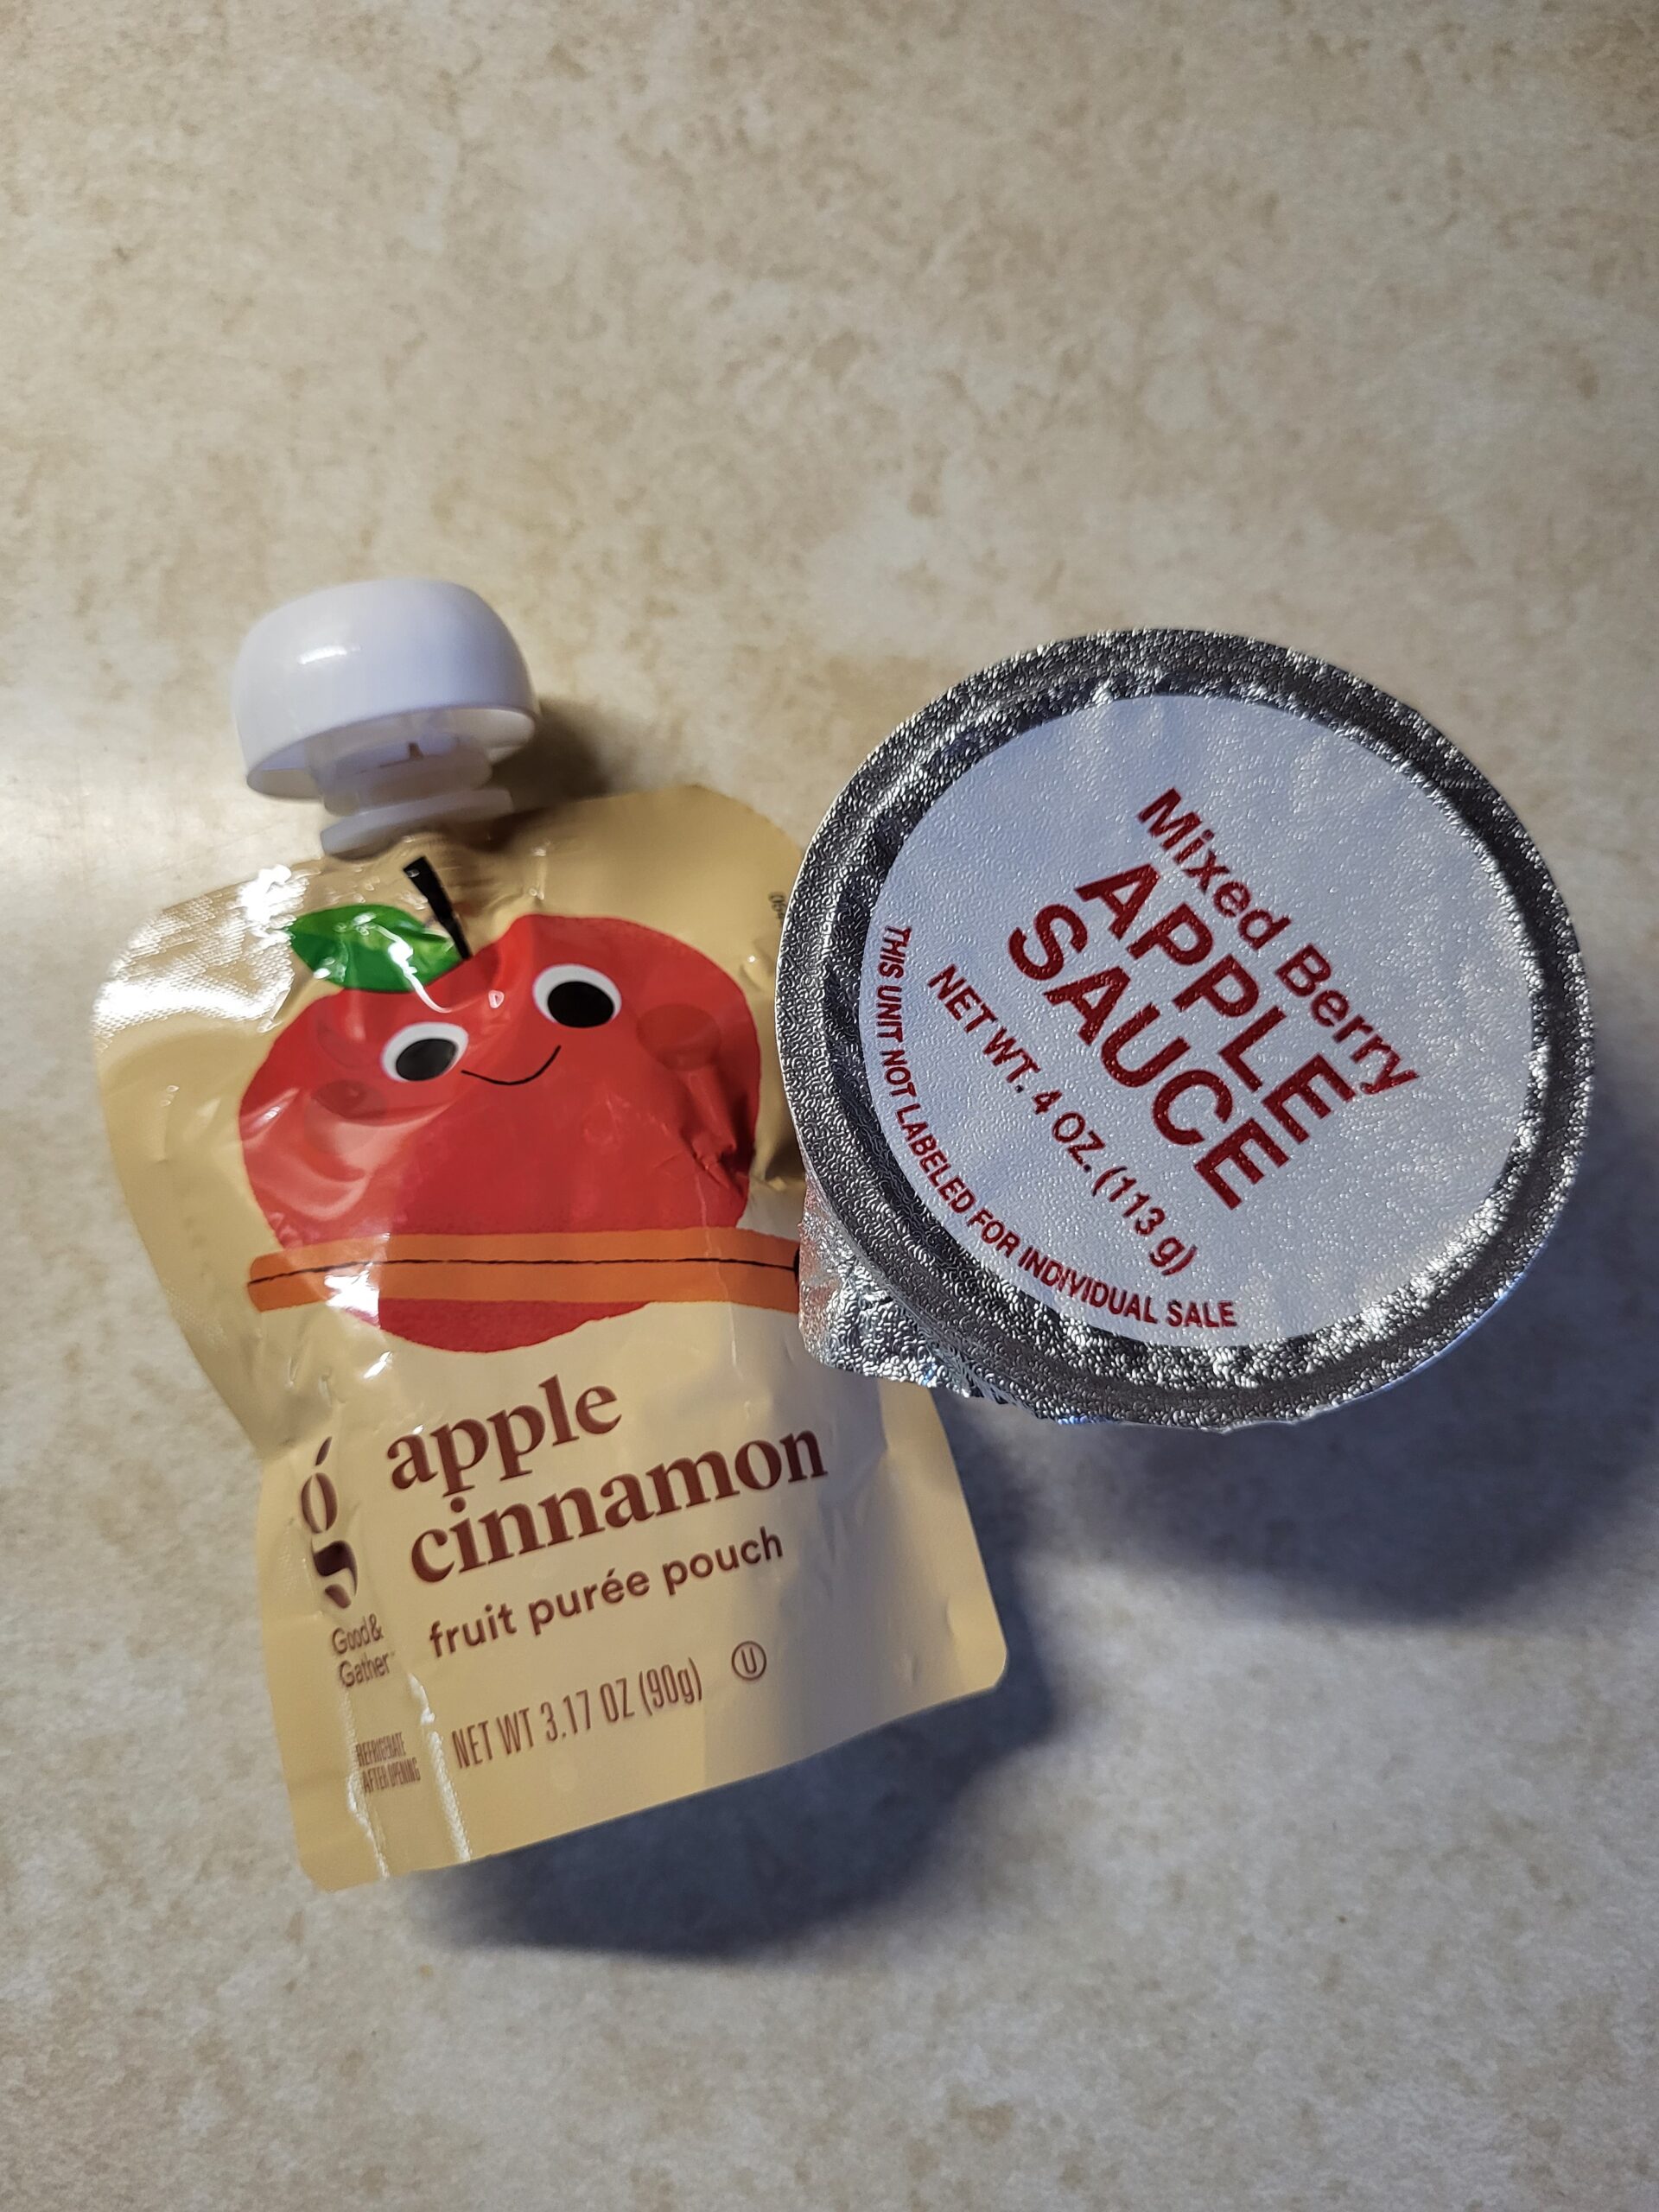 Applesauce is one of our toddler's favorite things to eat.